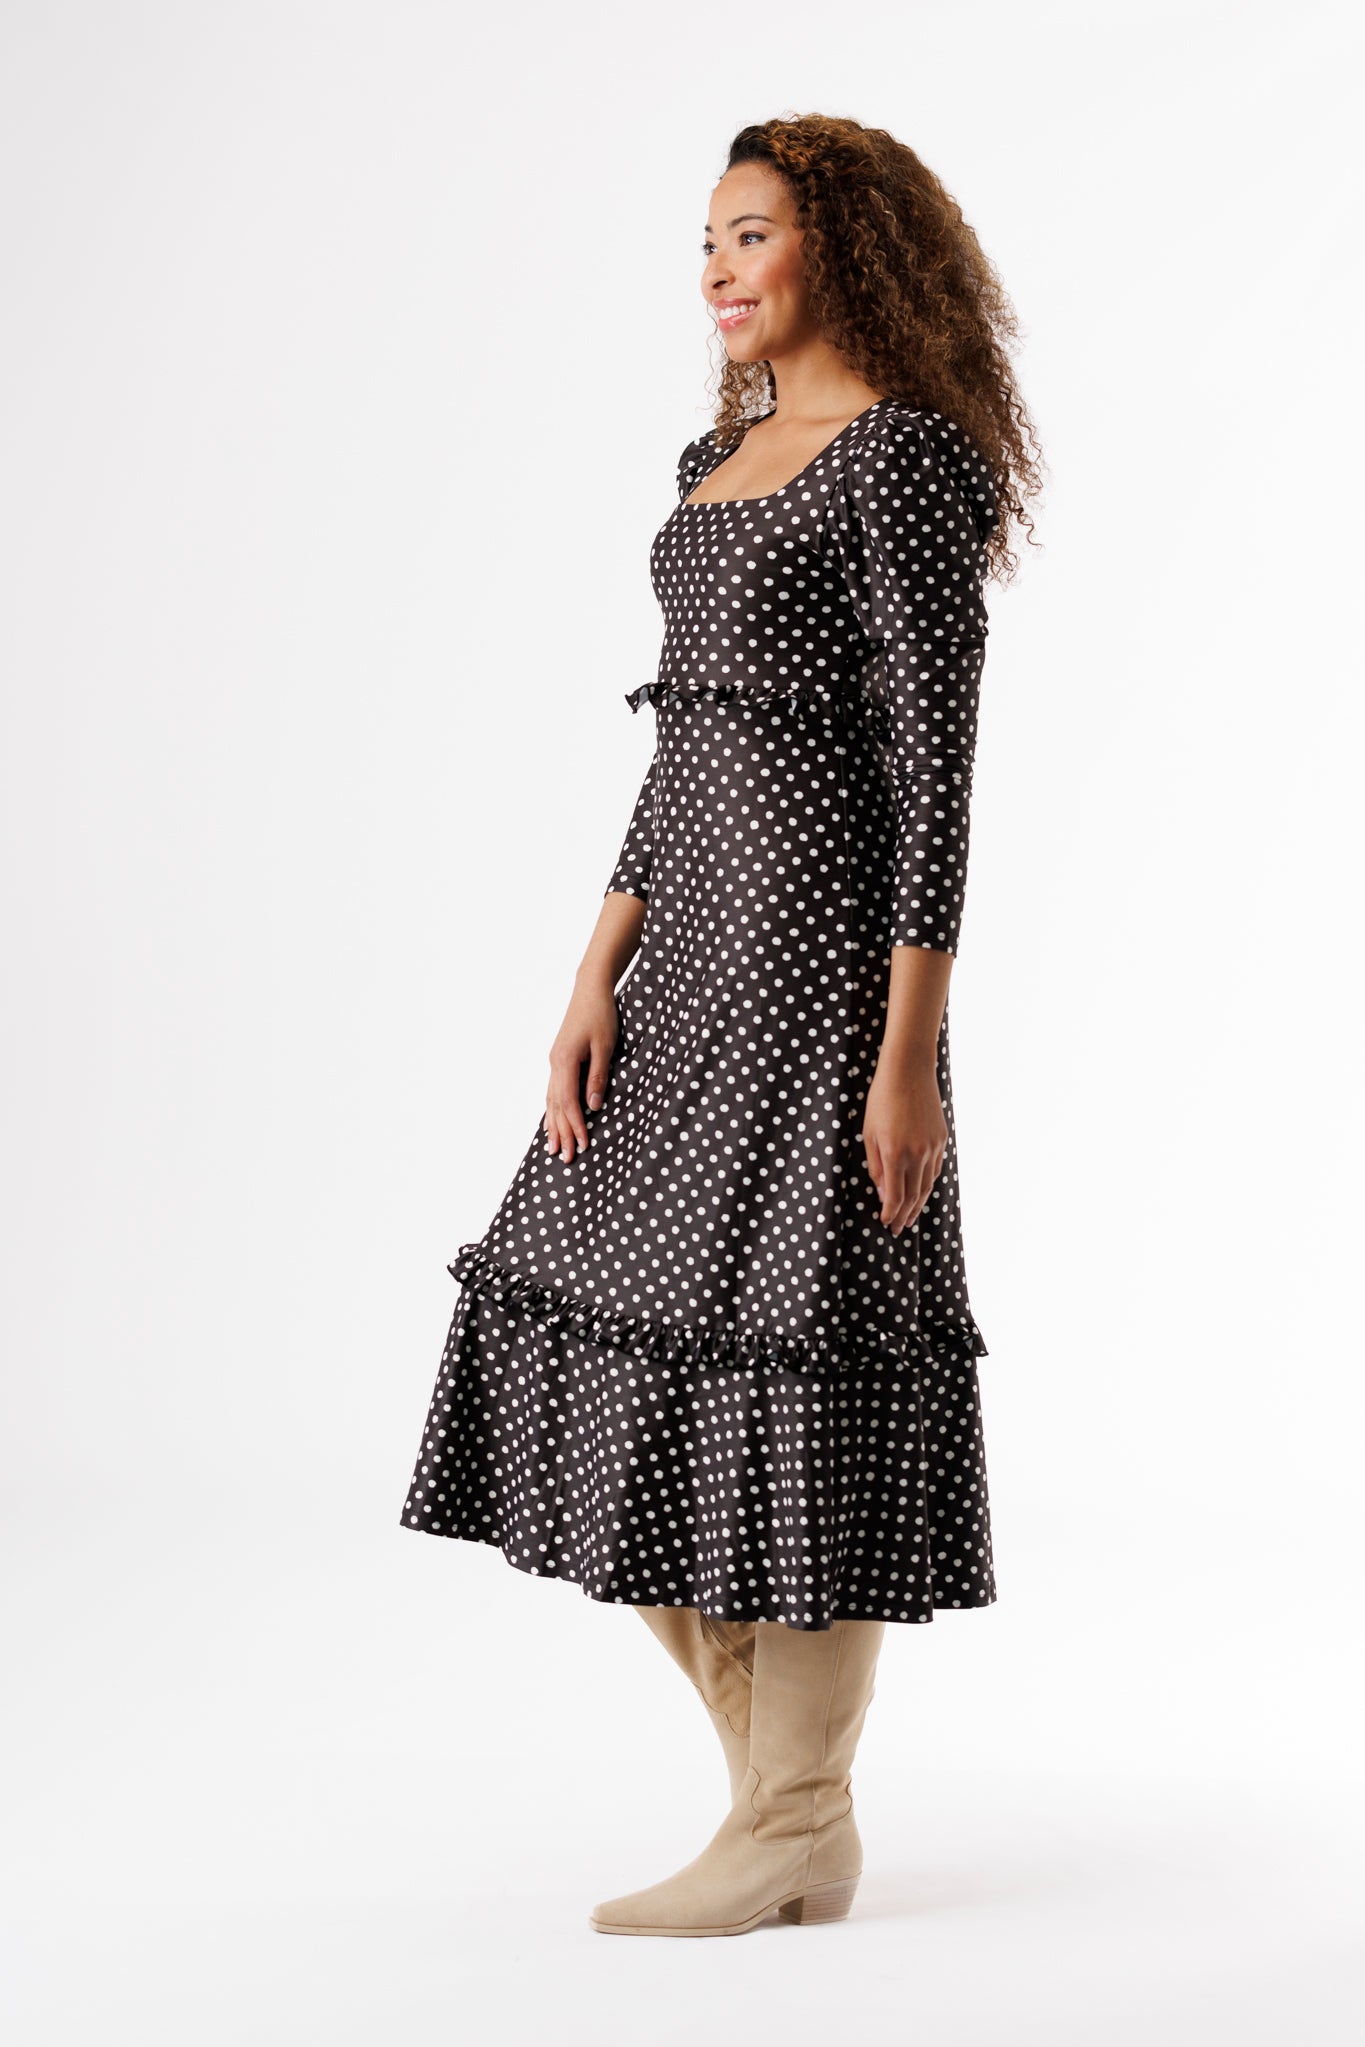 The Isadore Dress - Lover's Dot